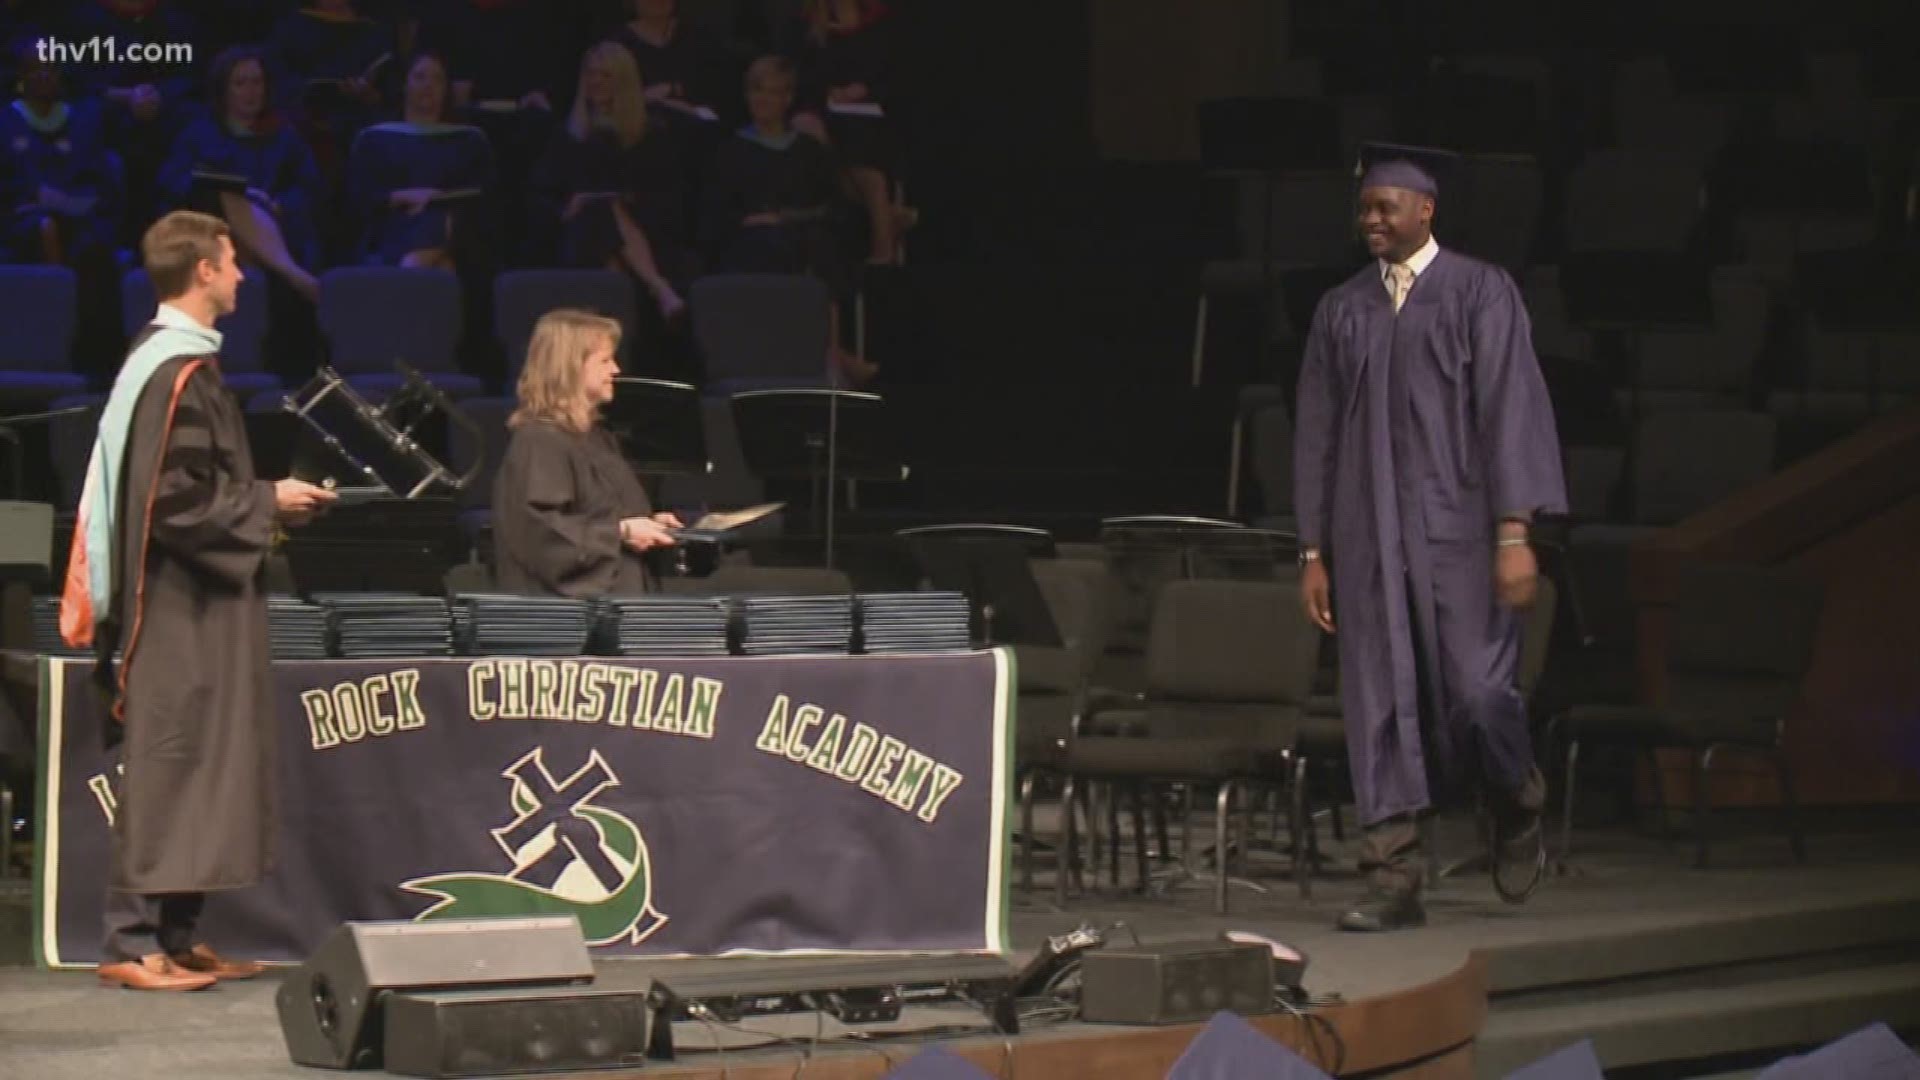 At six months old Kalin Bennett was diagnosed with autism, now he's graduating from Little Rock Christian.